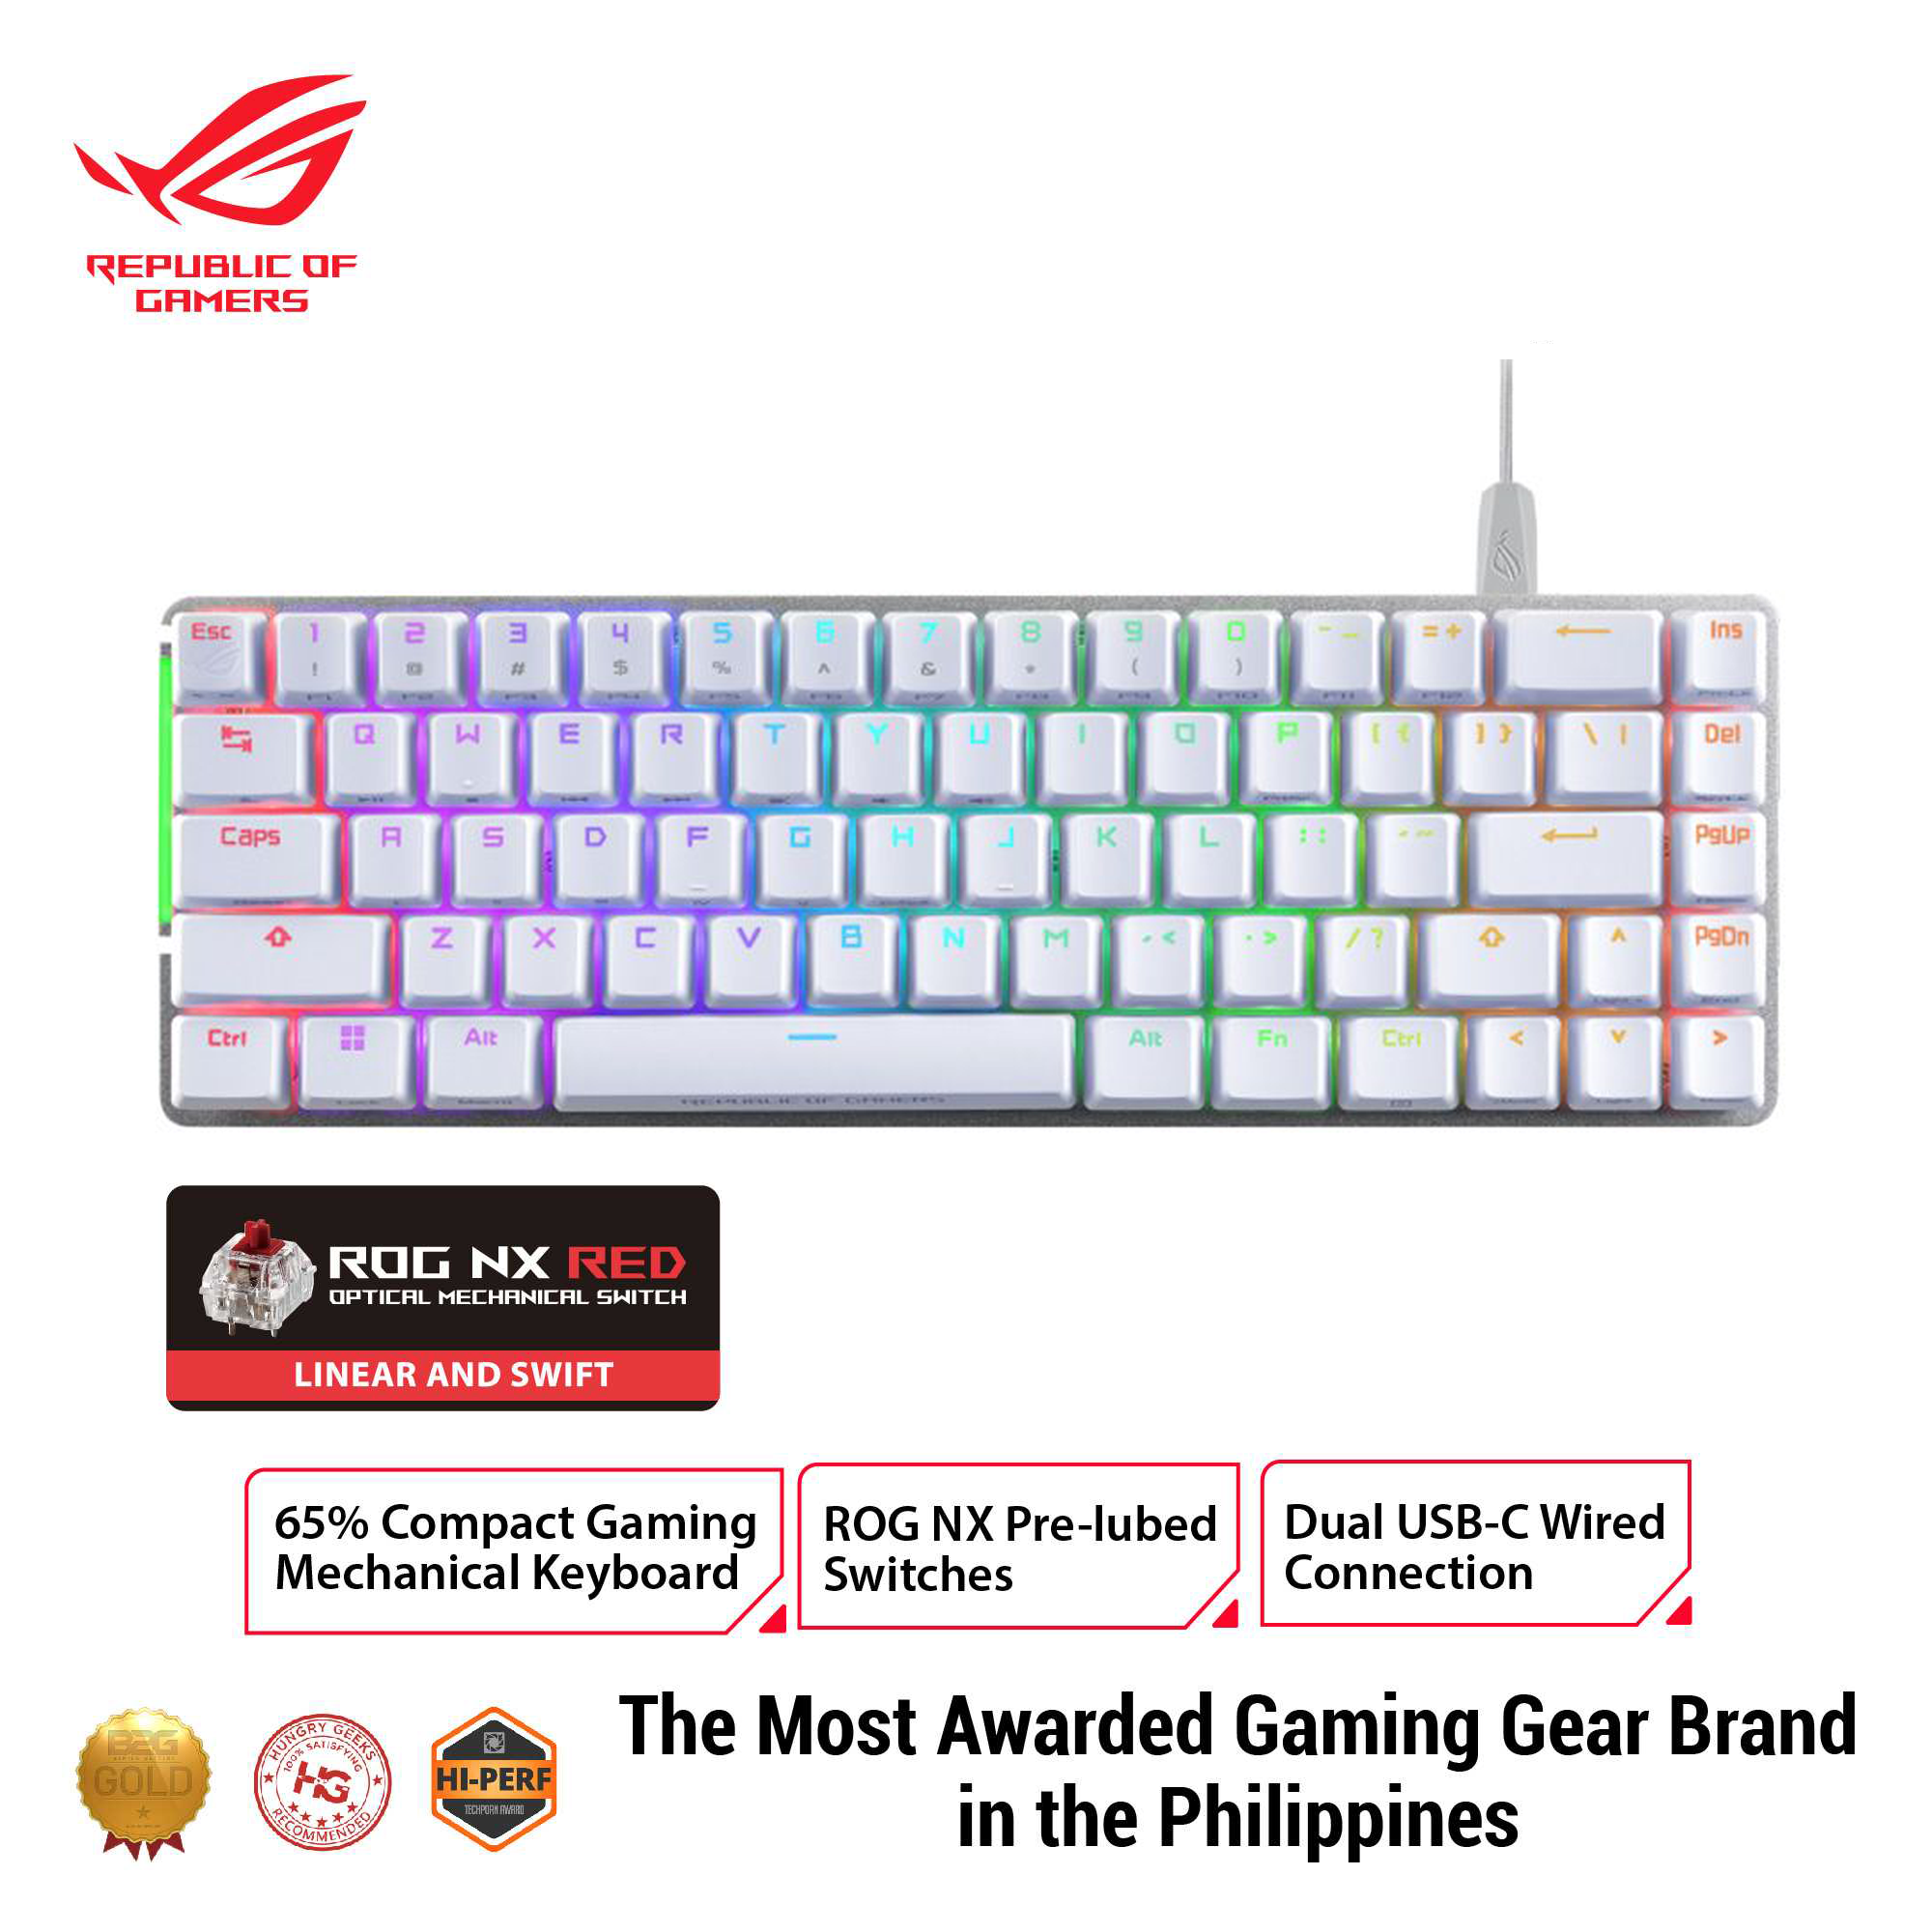 Clavier gamer ASUS ROG Falchion Ace White